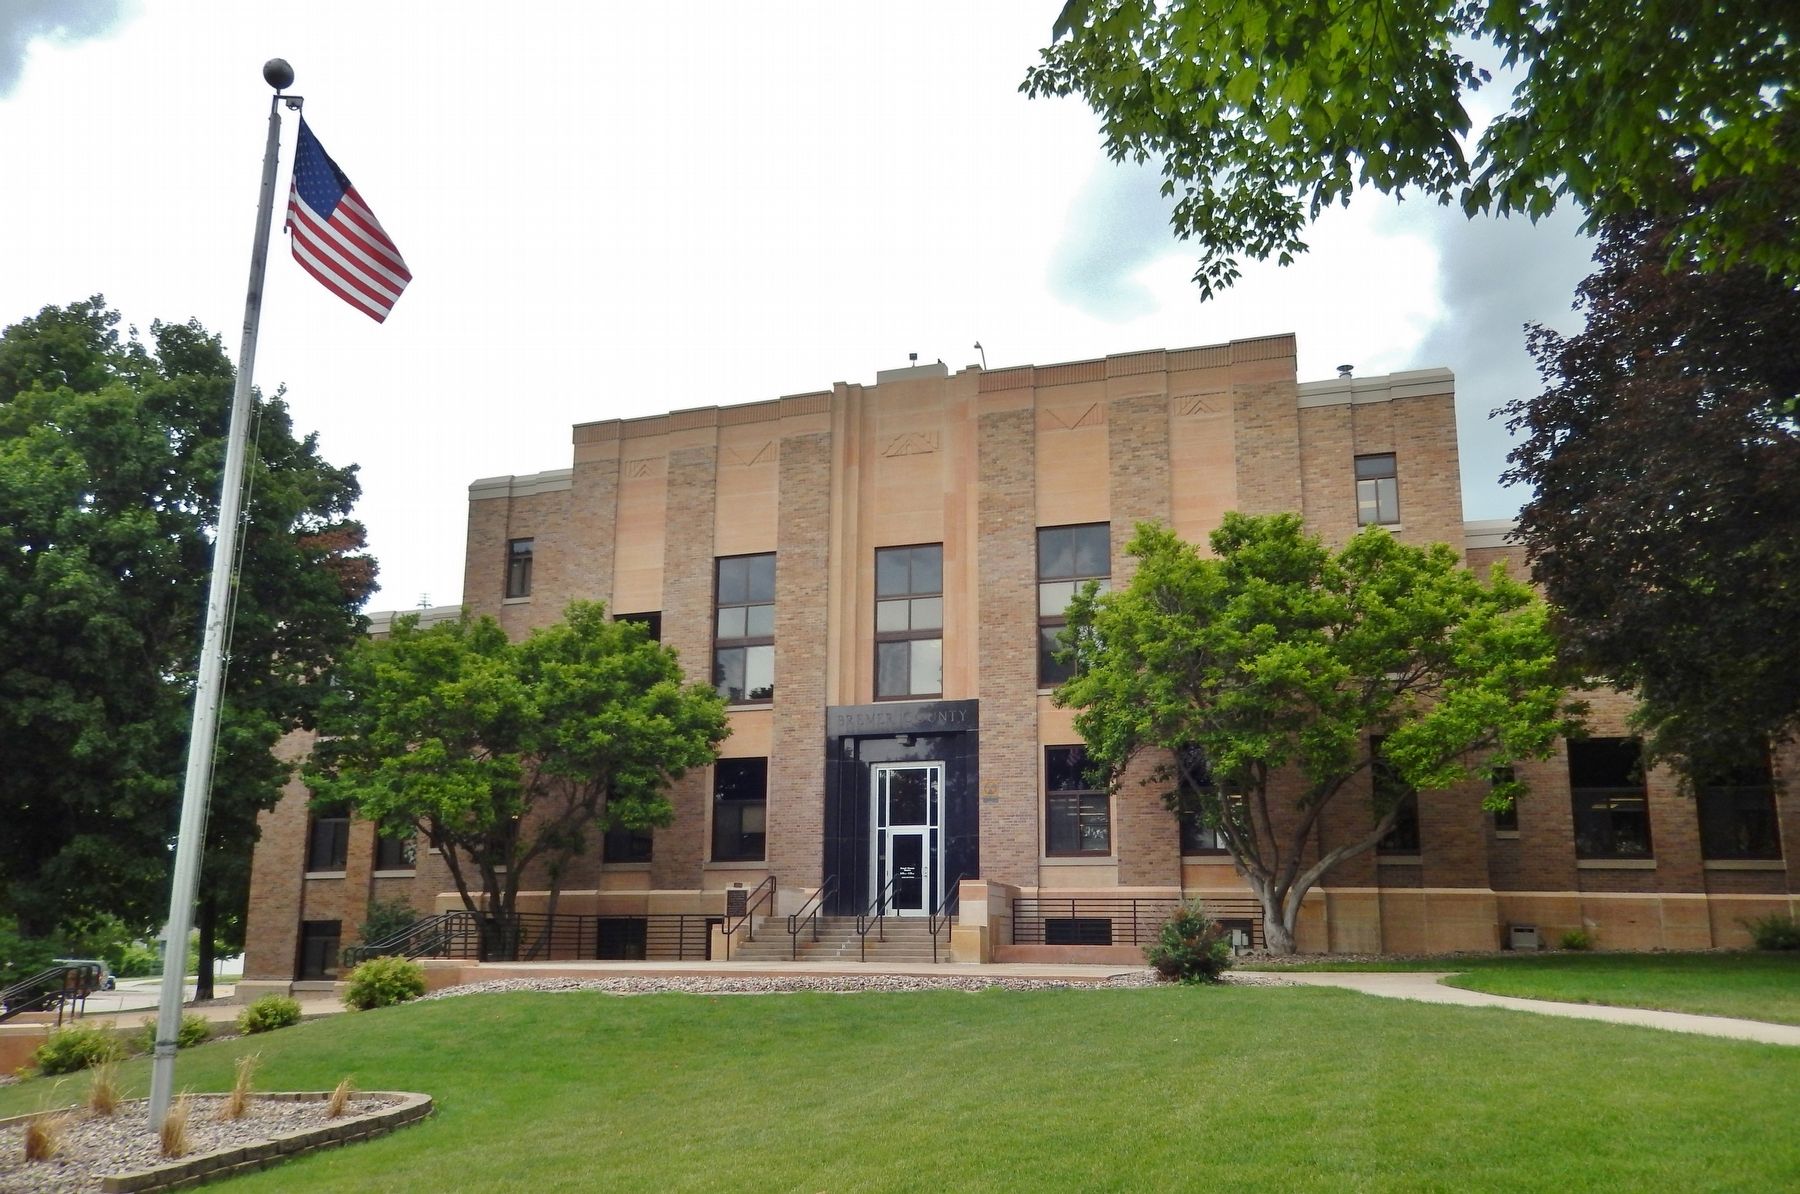 Bremer County Courthouse (<i>southeast elevation</i>) image. Click for full size.